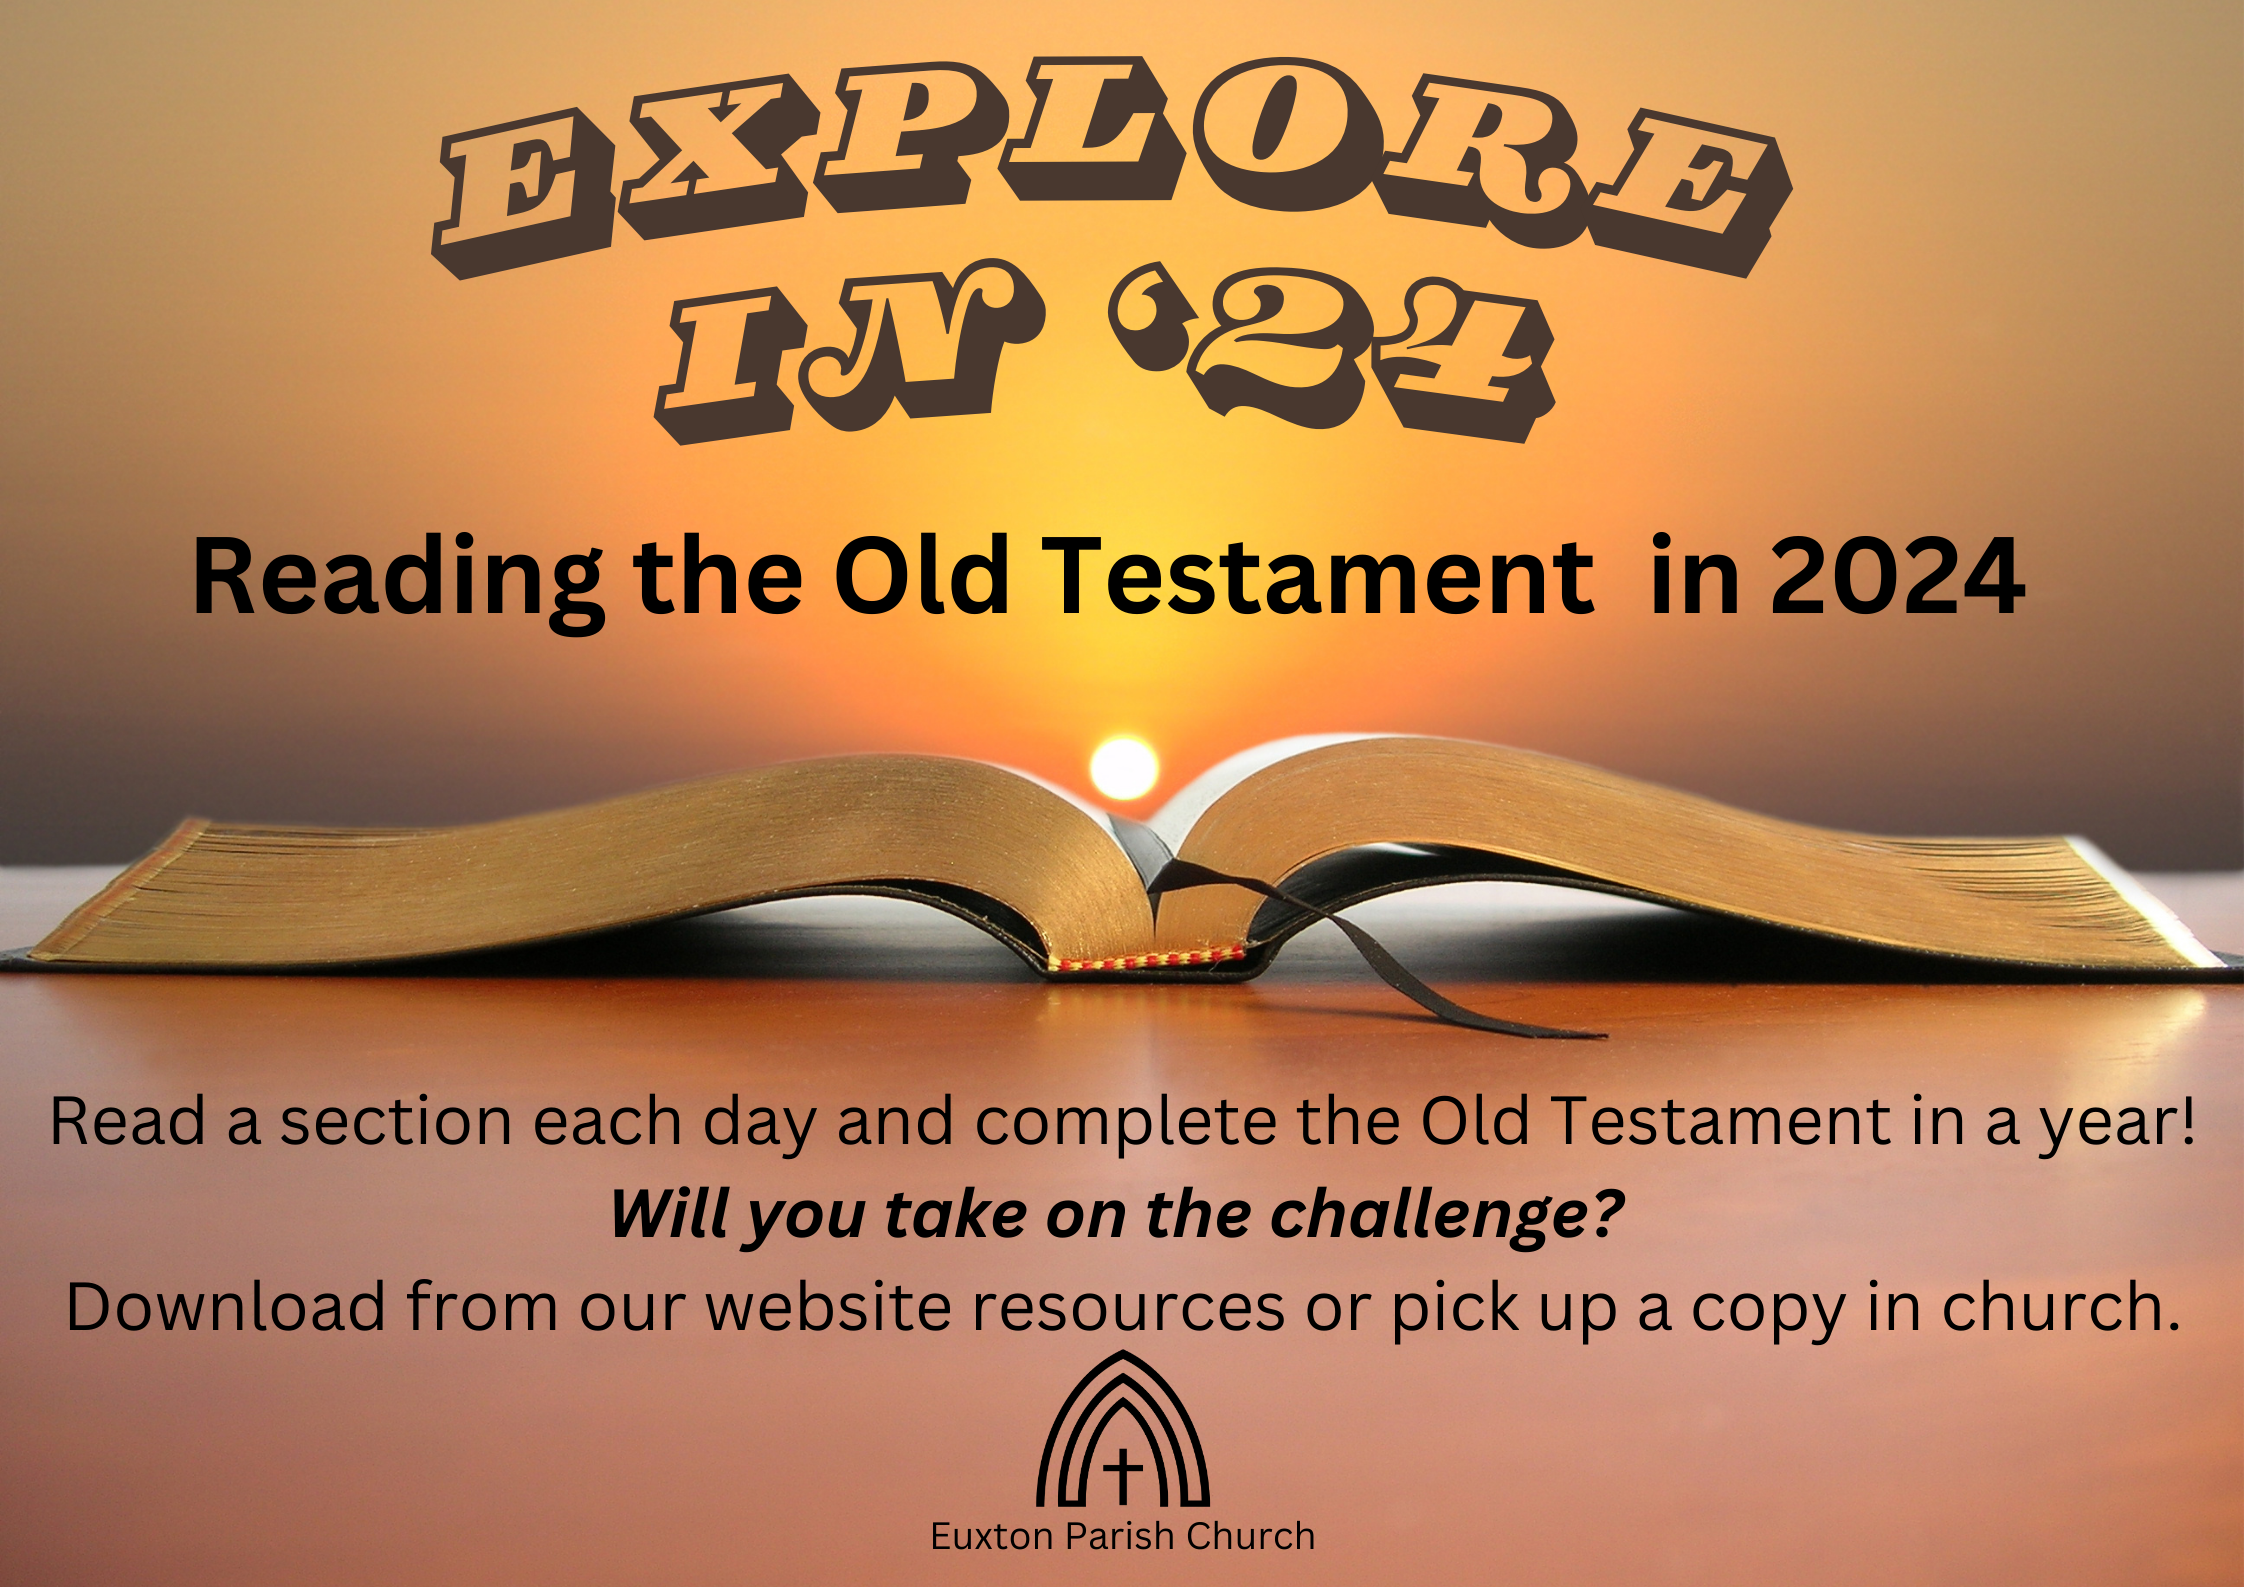 Explore in 24 - Bible Study Group